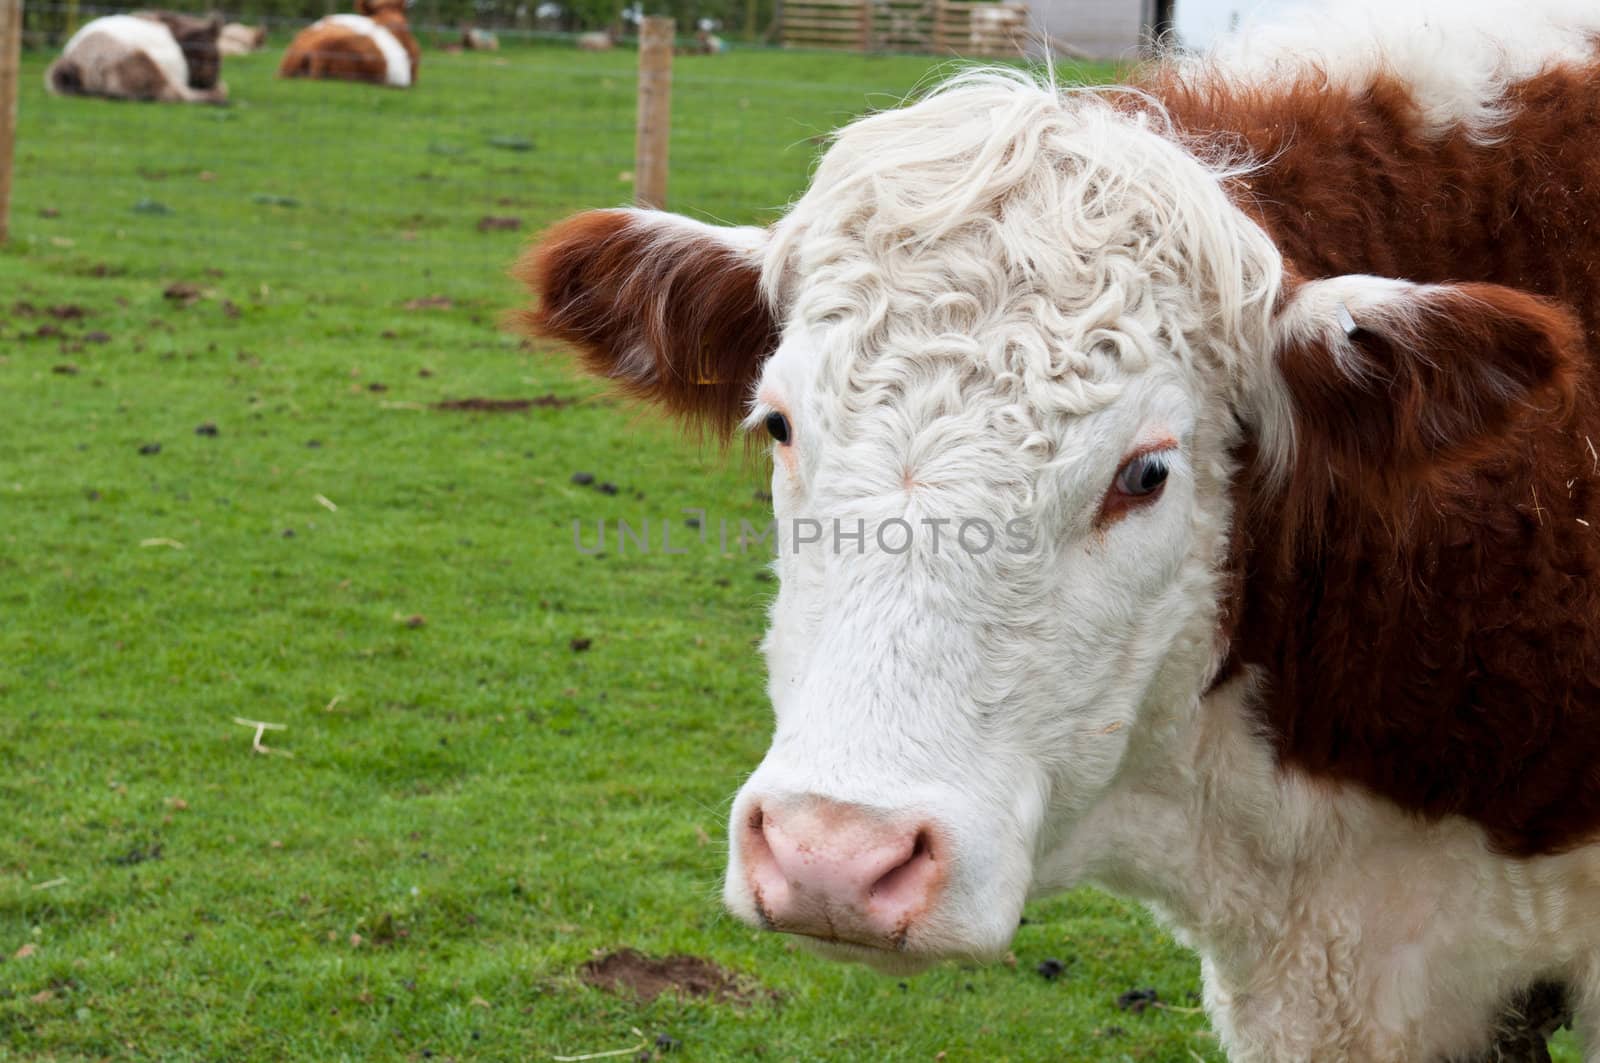 sweet cow portrait on a farm pasture (more cows laying at the background)